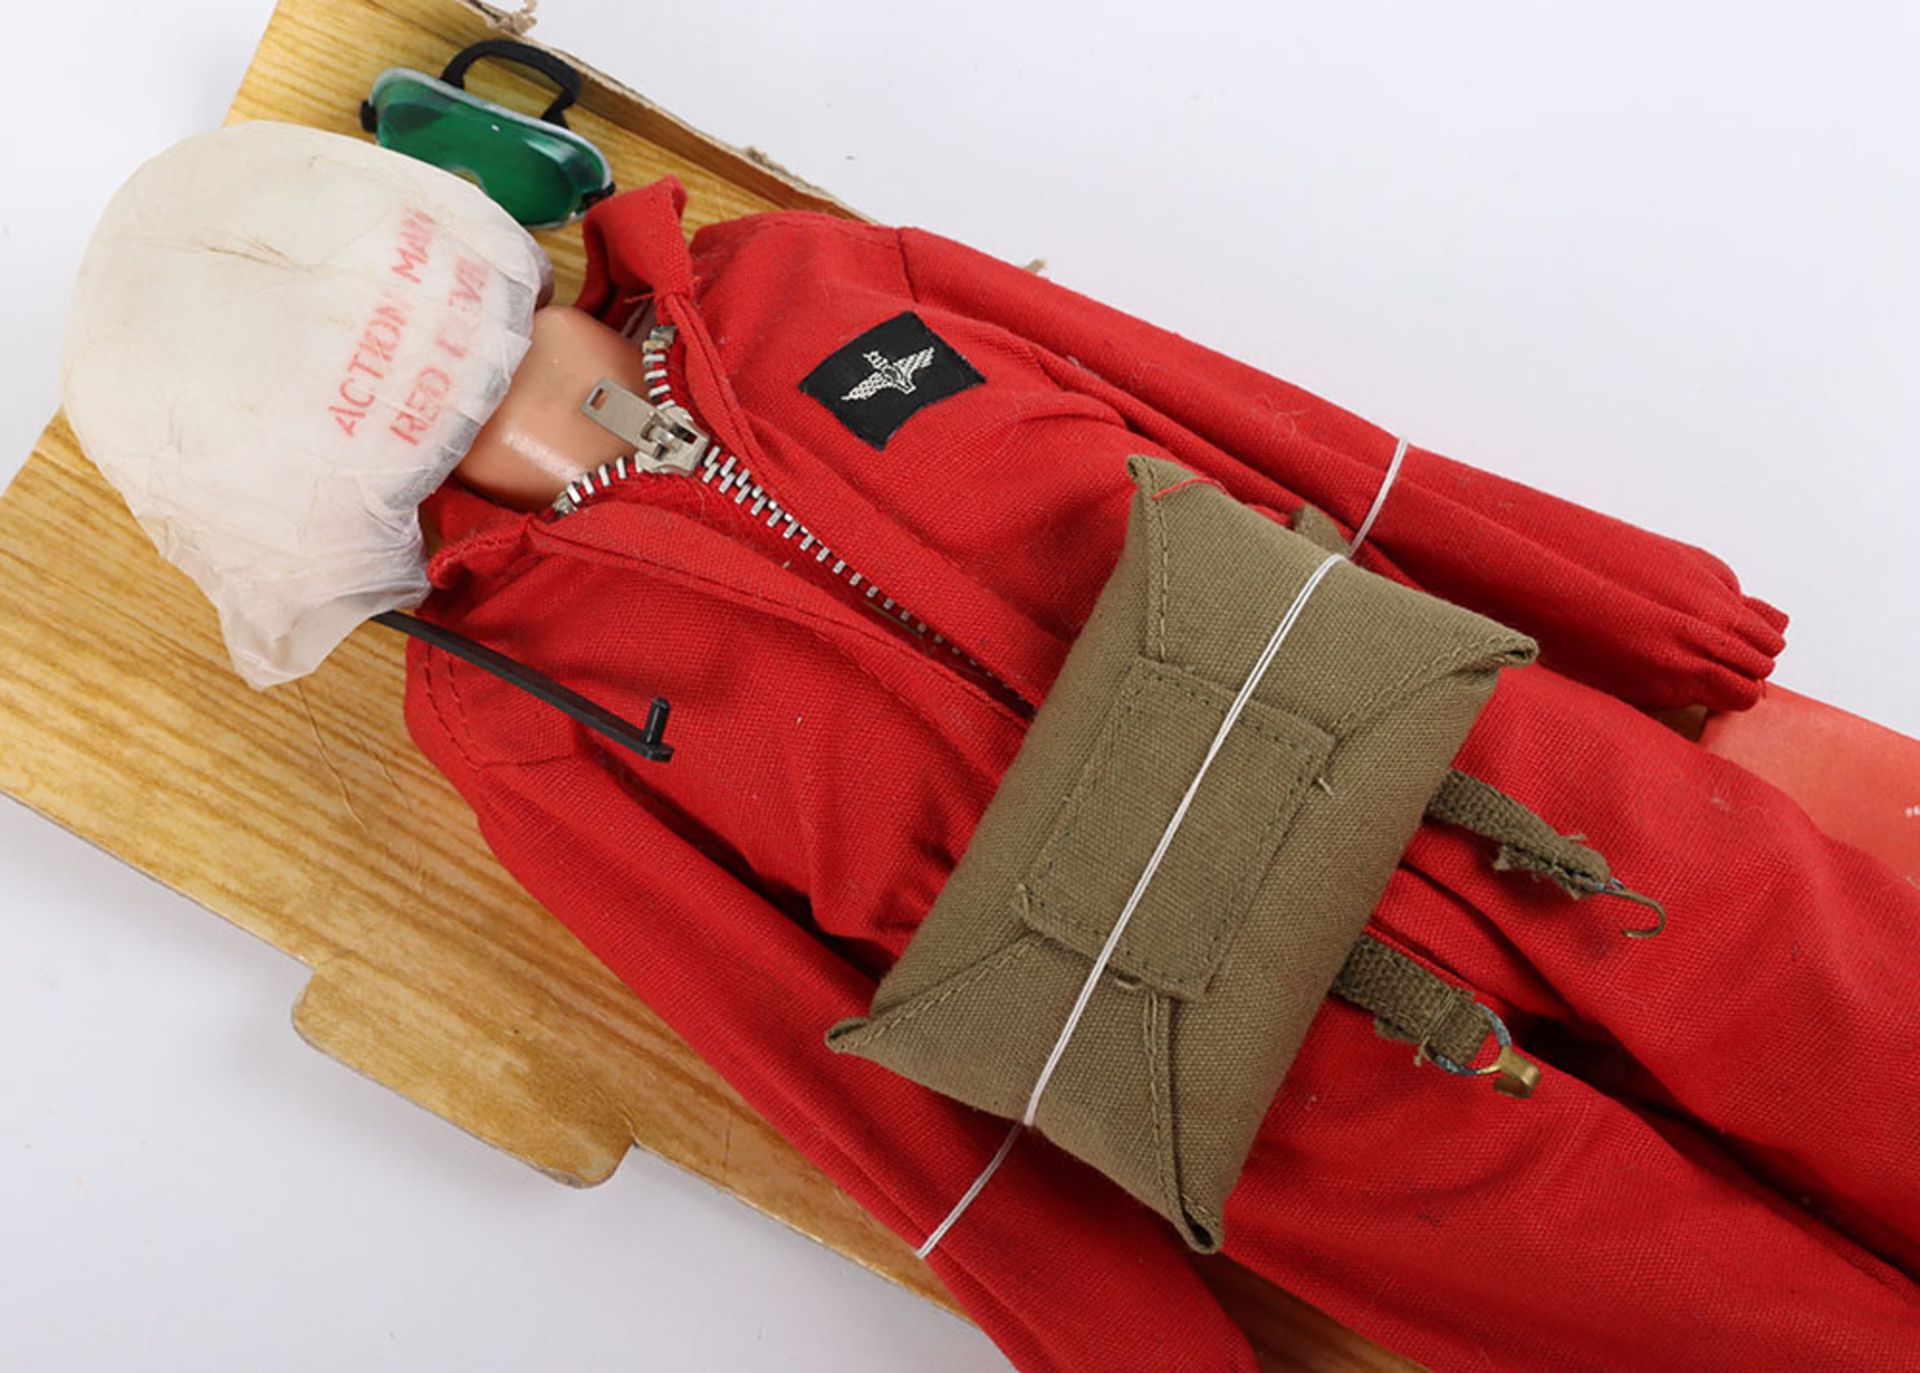 Action Man 1st issue Red Devil Parachutist Outfit - Image 3 of 3